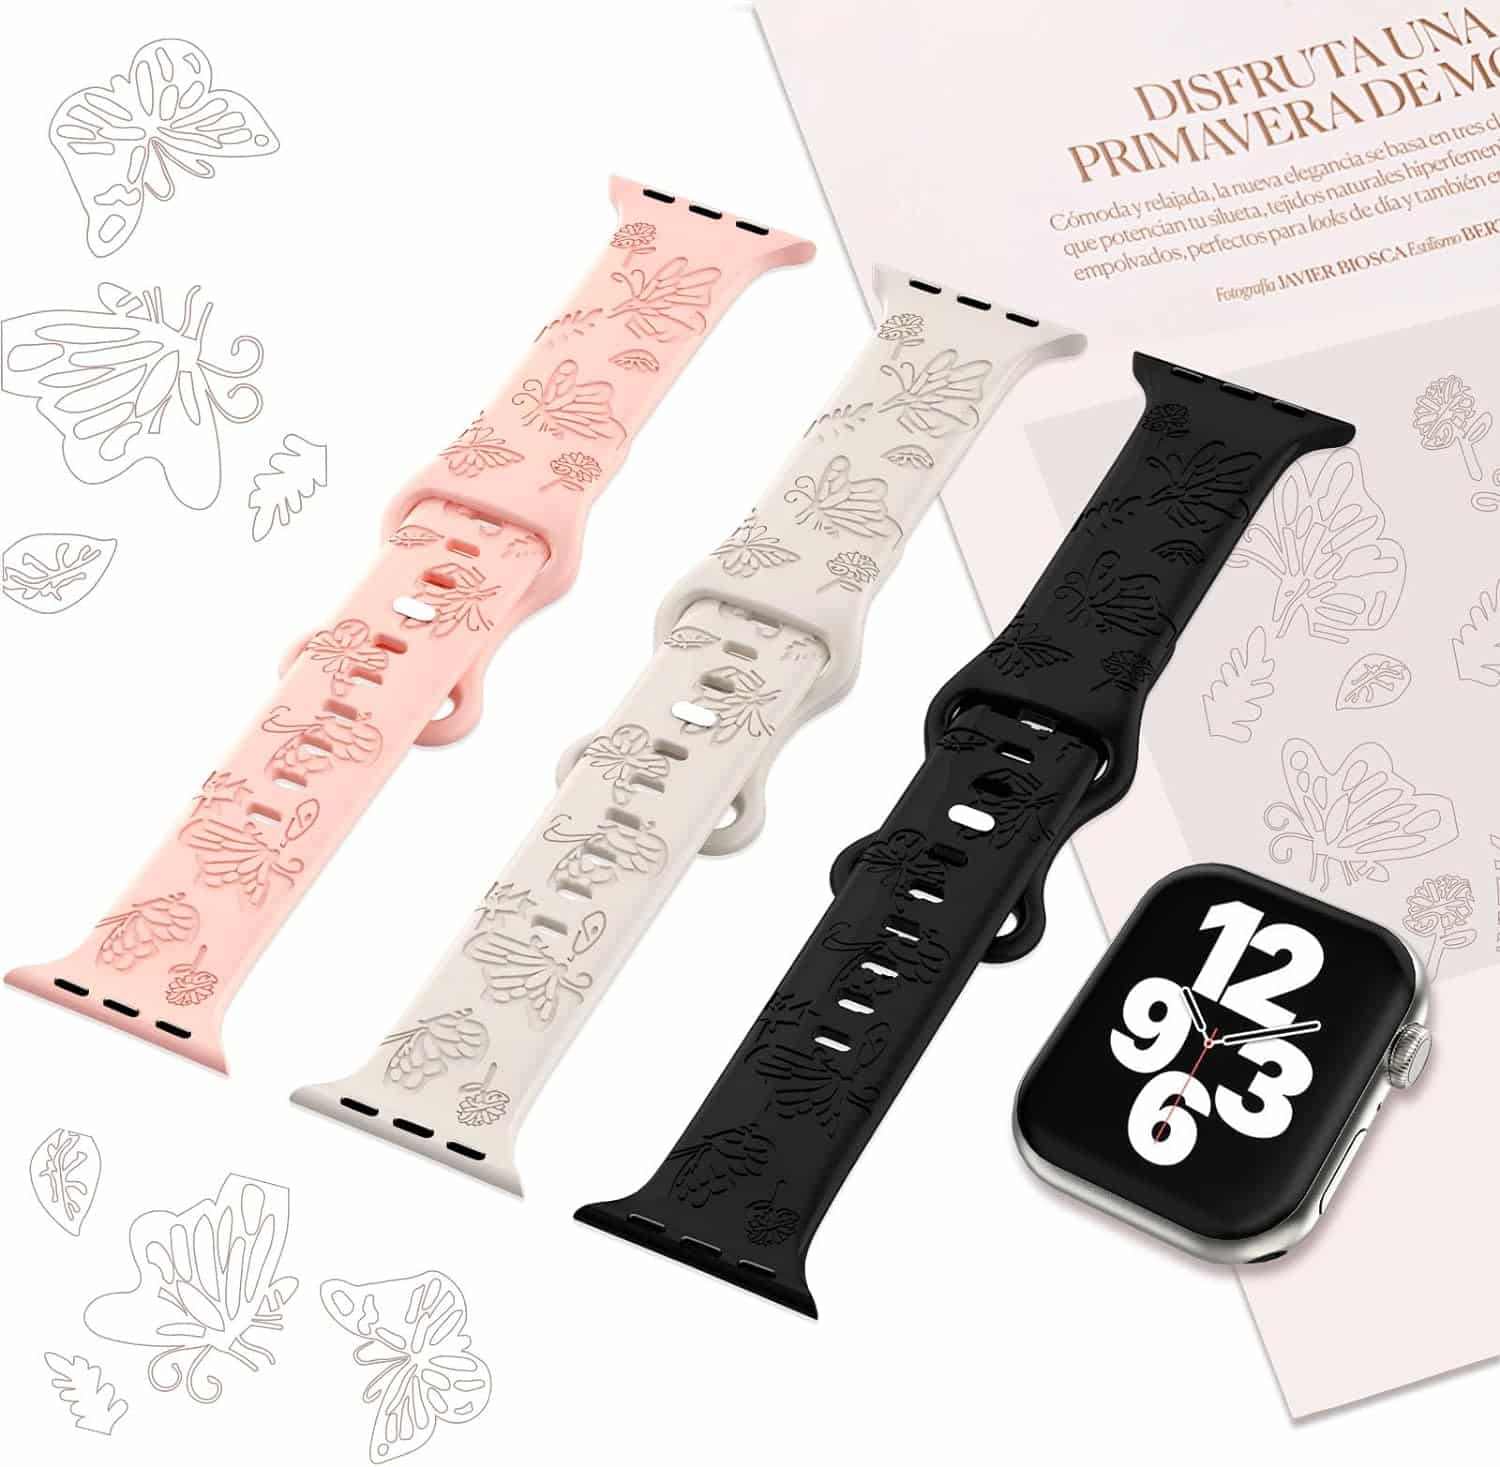 Maxtop 3 Pack Soft Silicone Bands - Floral Butterfly Engraved Smart Watch Waterproof Band - A Review